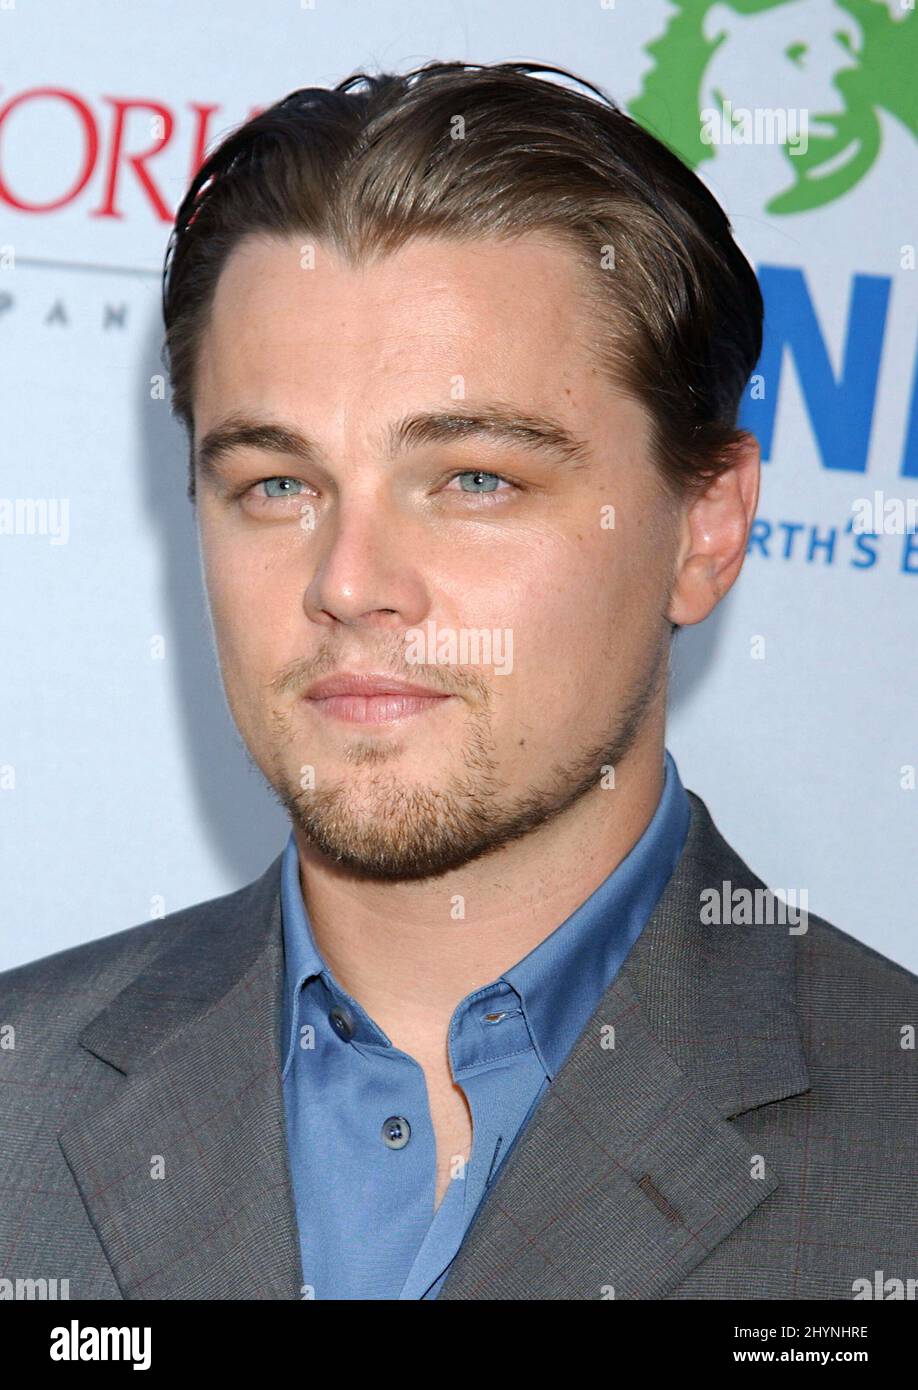 Leonardo DiCaprio attends the 'Earth To L.A.! - The Greatest Show On The Earth' Benefit for the Natural Resources Defense Council, in California. Picture: UK Press Stock Photo